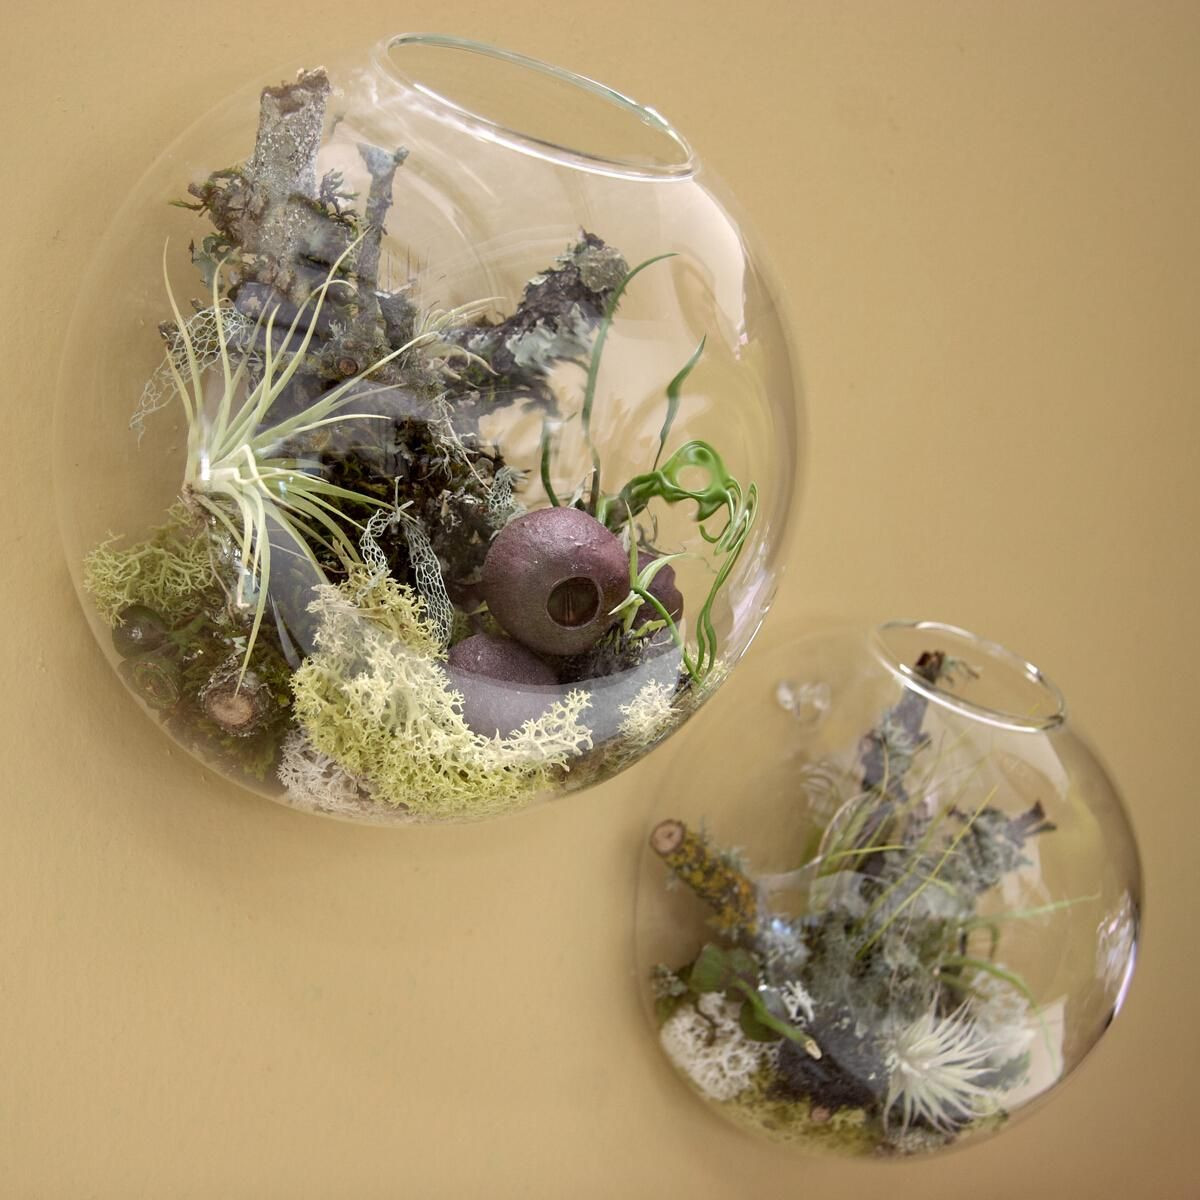 30 Ideal Air Plant Vase Ideas 2024 free download air plant vase ideas of wall bubble terrariums glass wall vase for flowers indoor plants in 3pcs set air plant wall glass terrariumwall bubble terrariumwall plantersfighting fish tank for wa